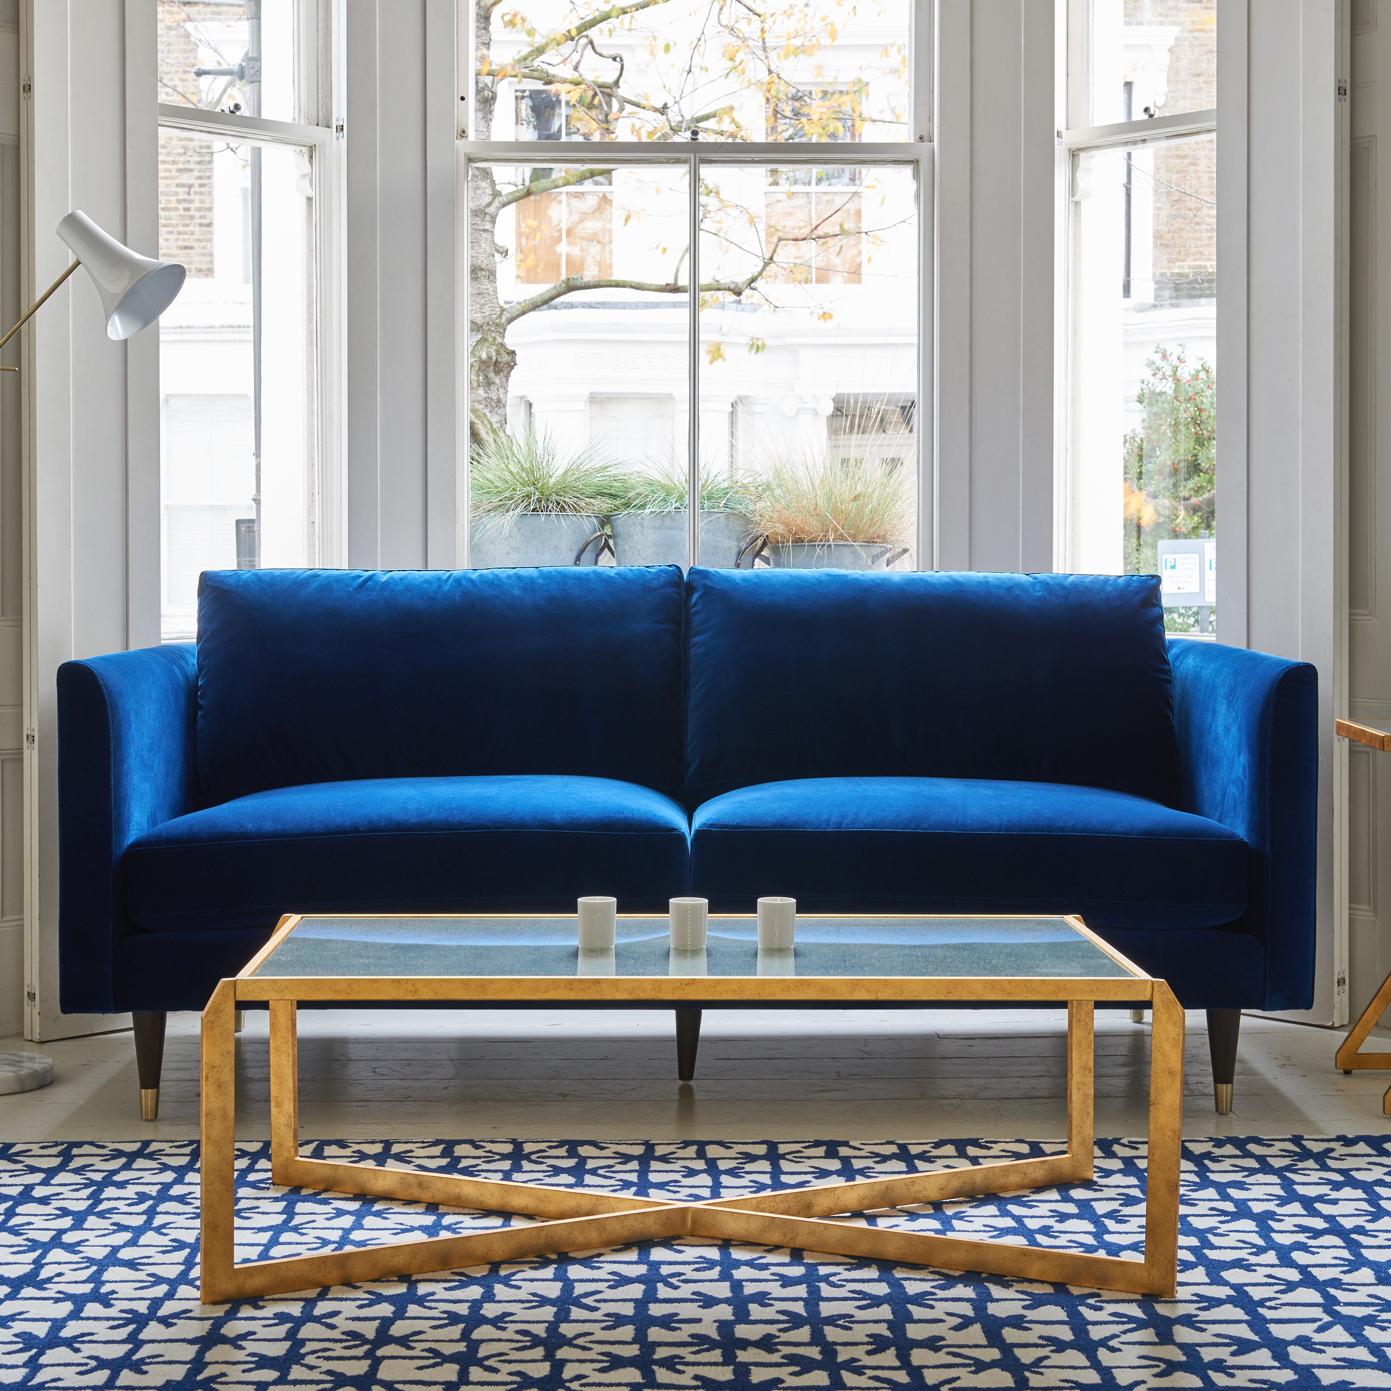 Henry Three 2 Seater Velvet Sofa – Navy Blue Henry by Christiane Lemieux is a contemporary sofa with - Image 2 of 3